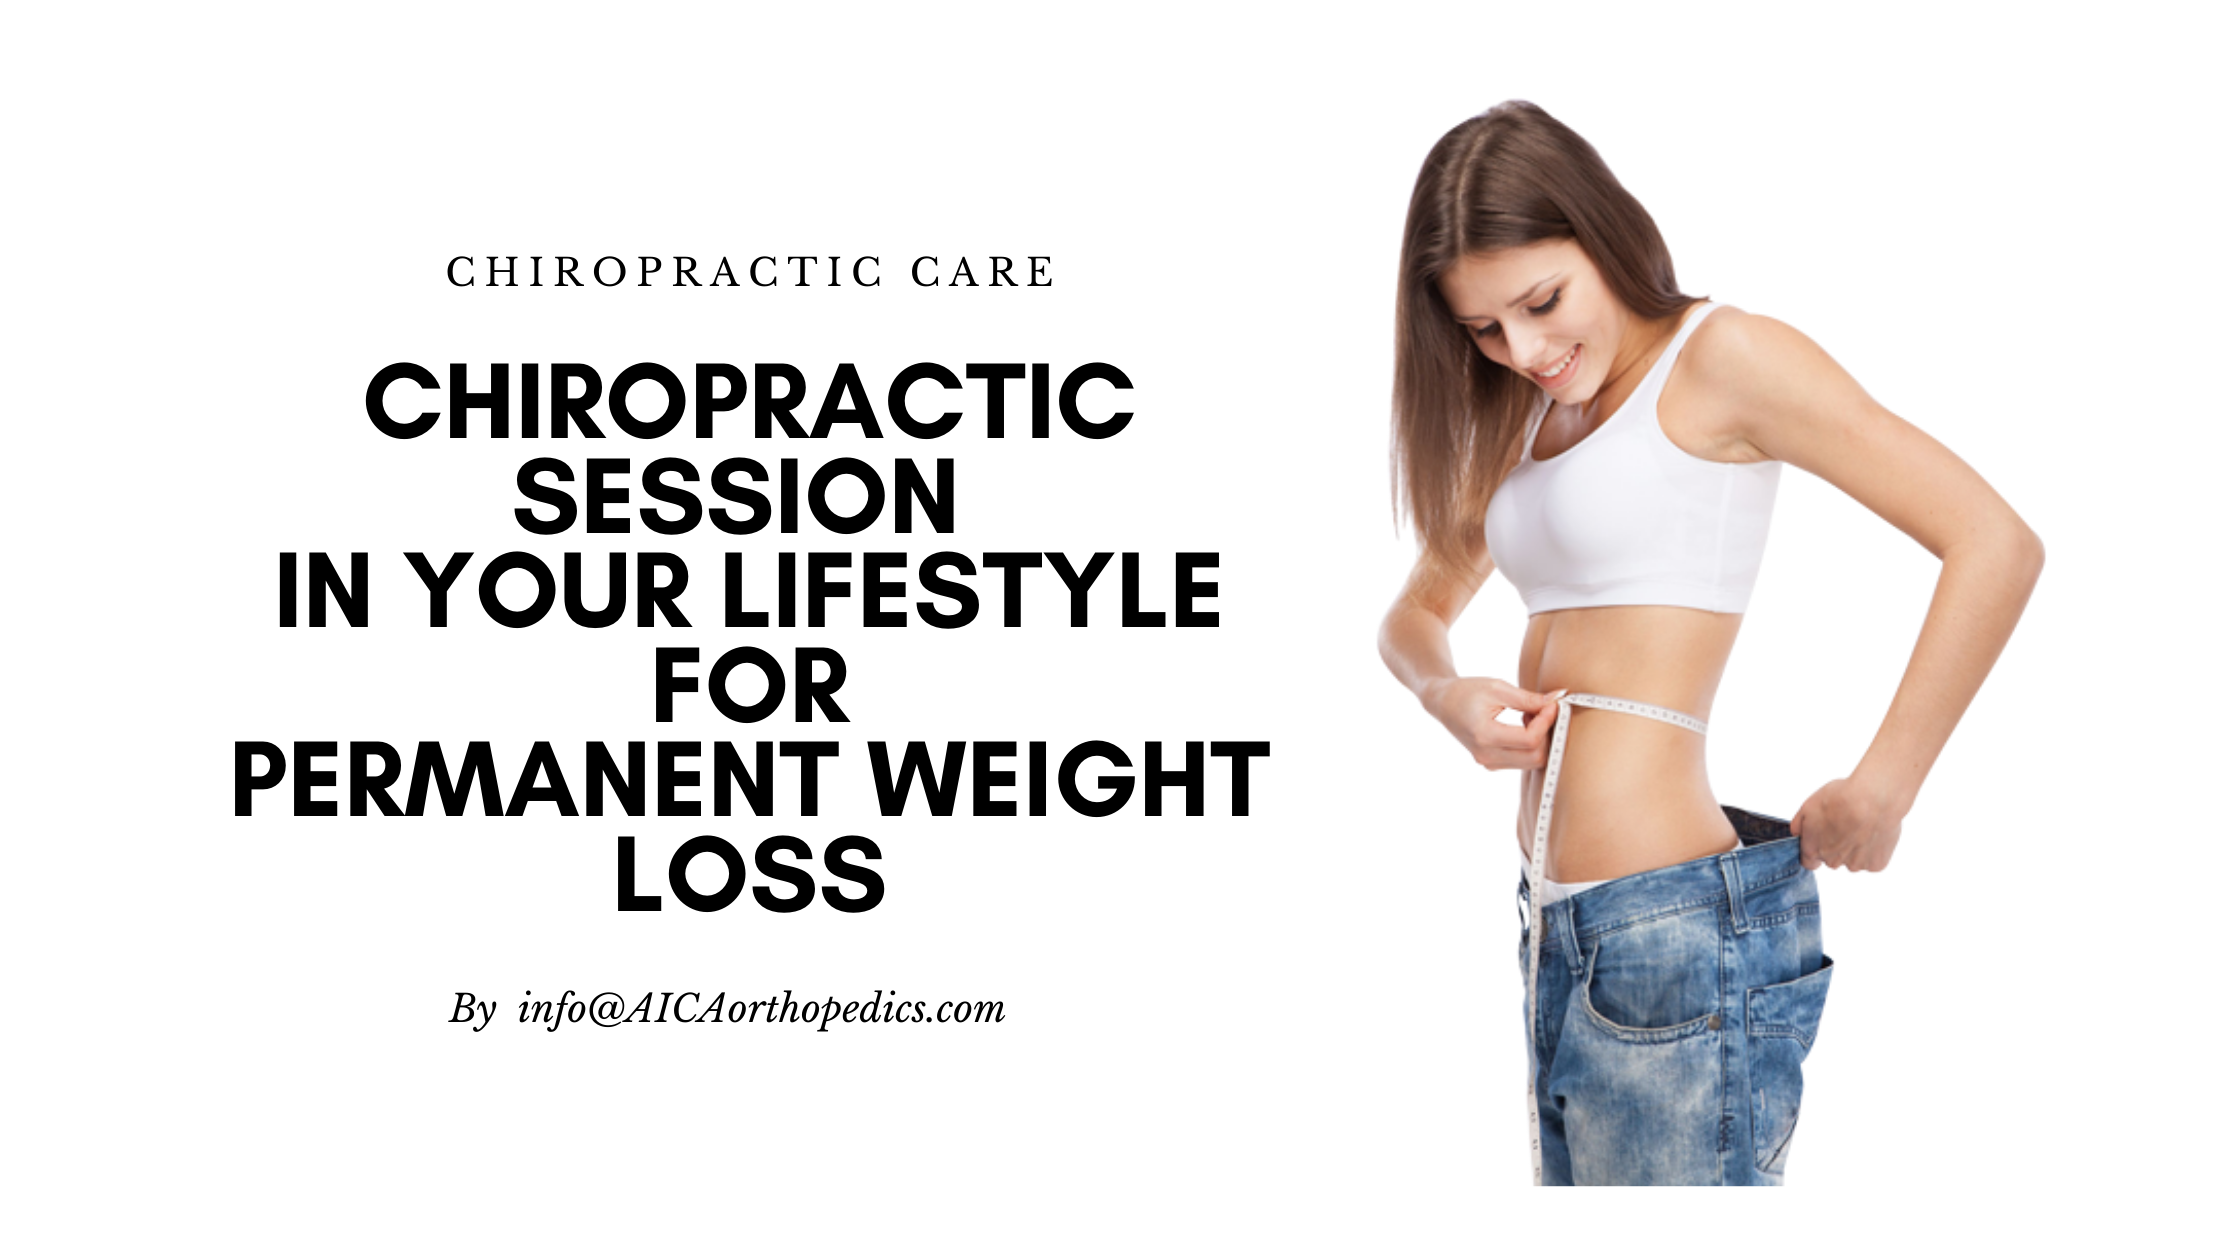 Ladies! Forget Fad Diets and Add a Chiropractic Session in Your Lifestyle for Permanent Weight Loss